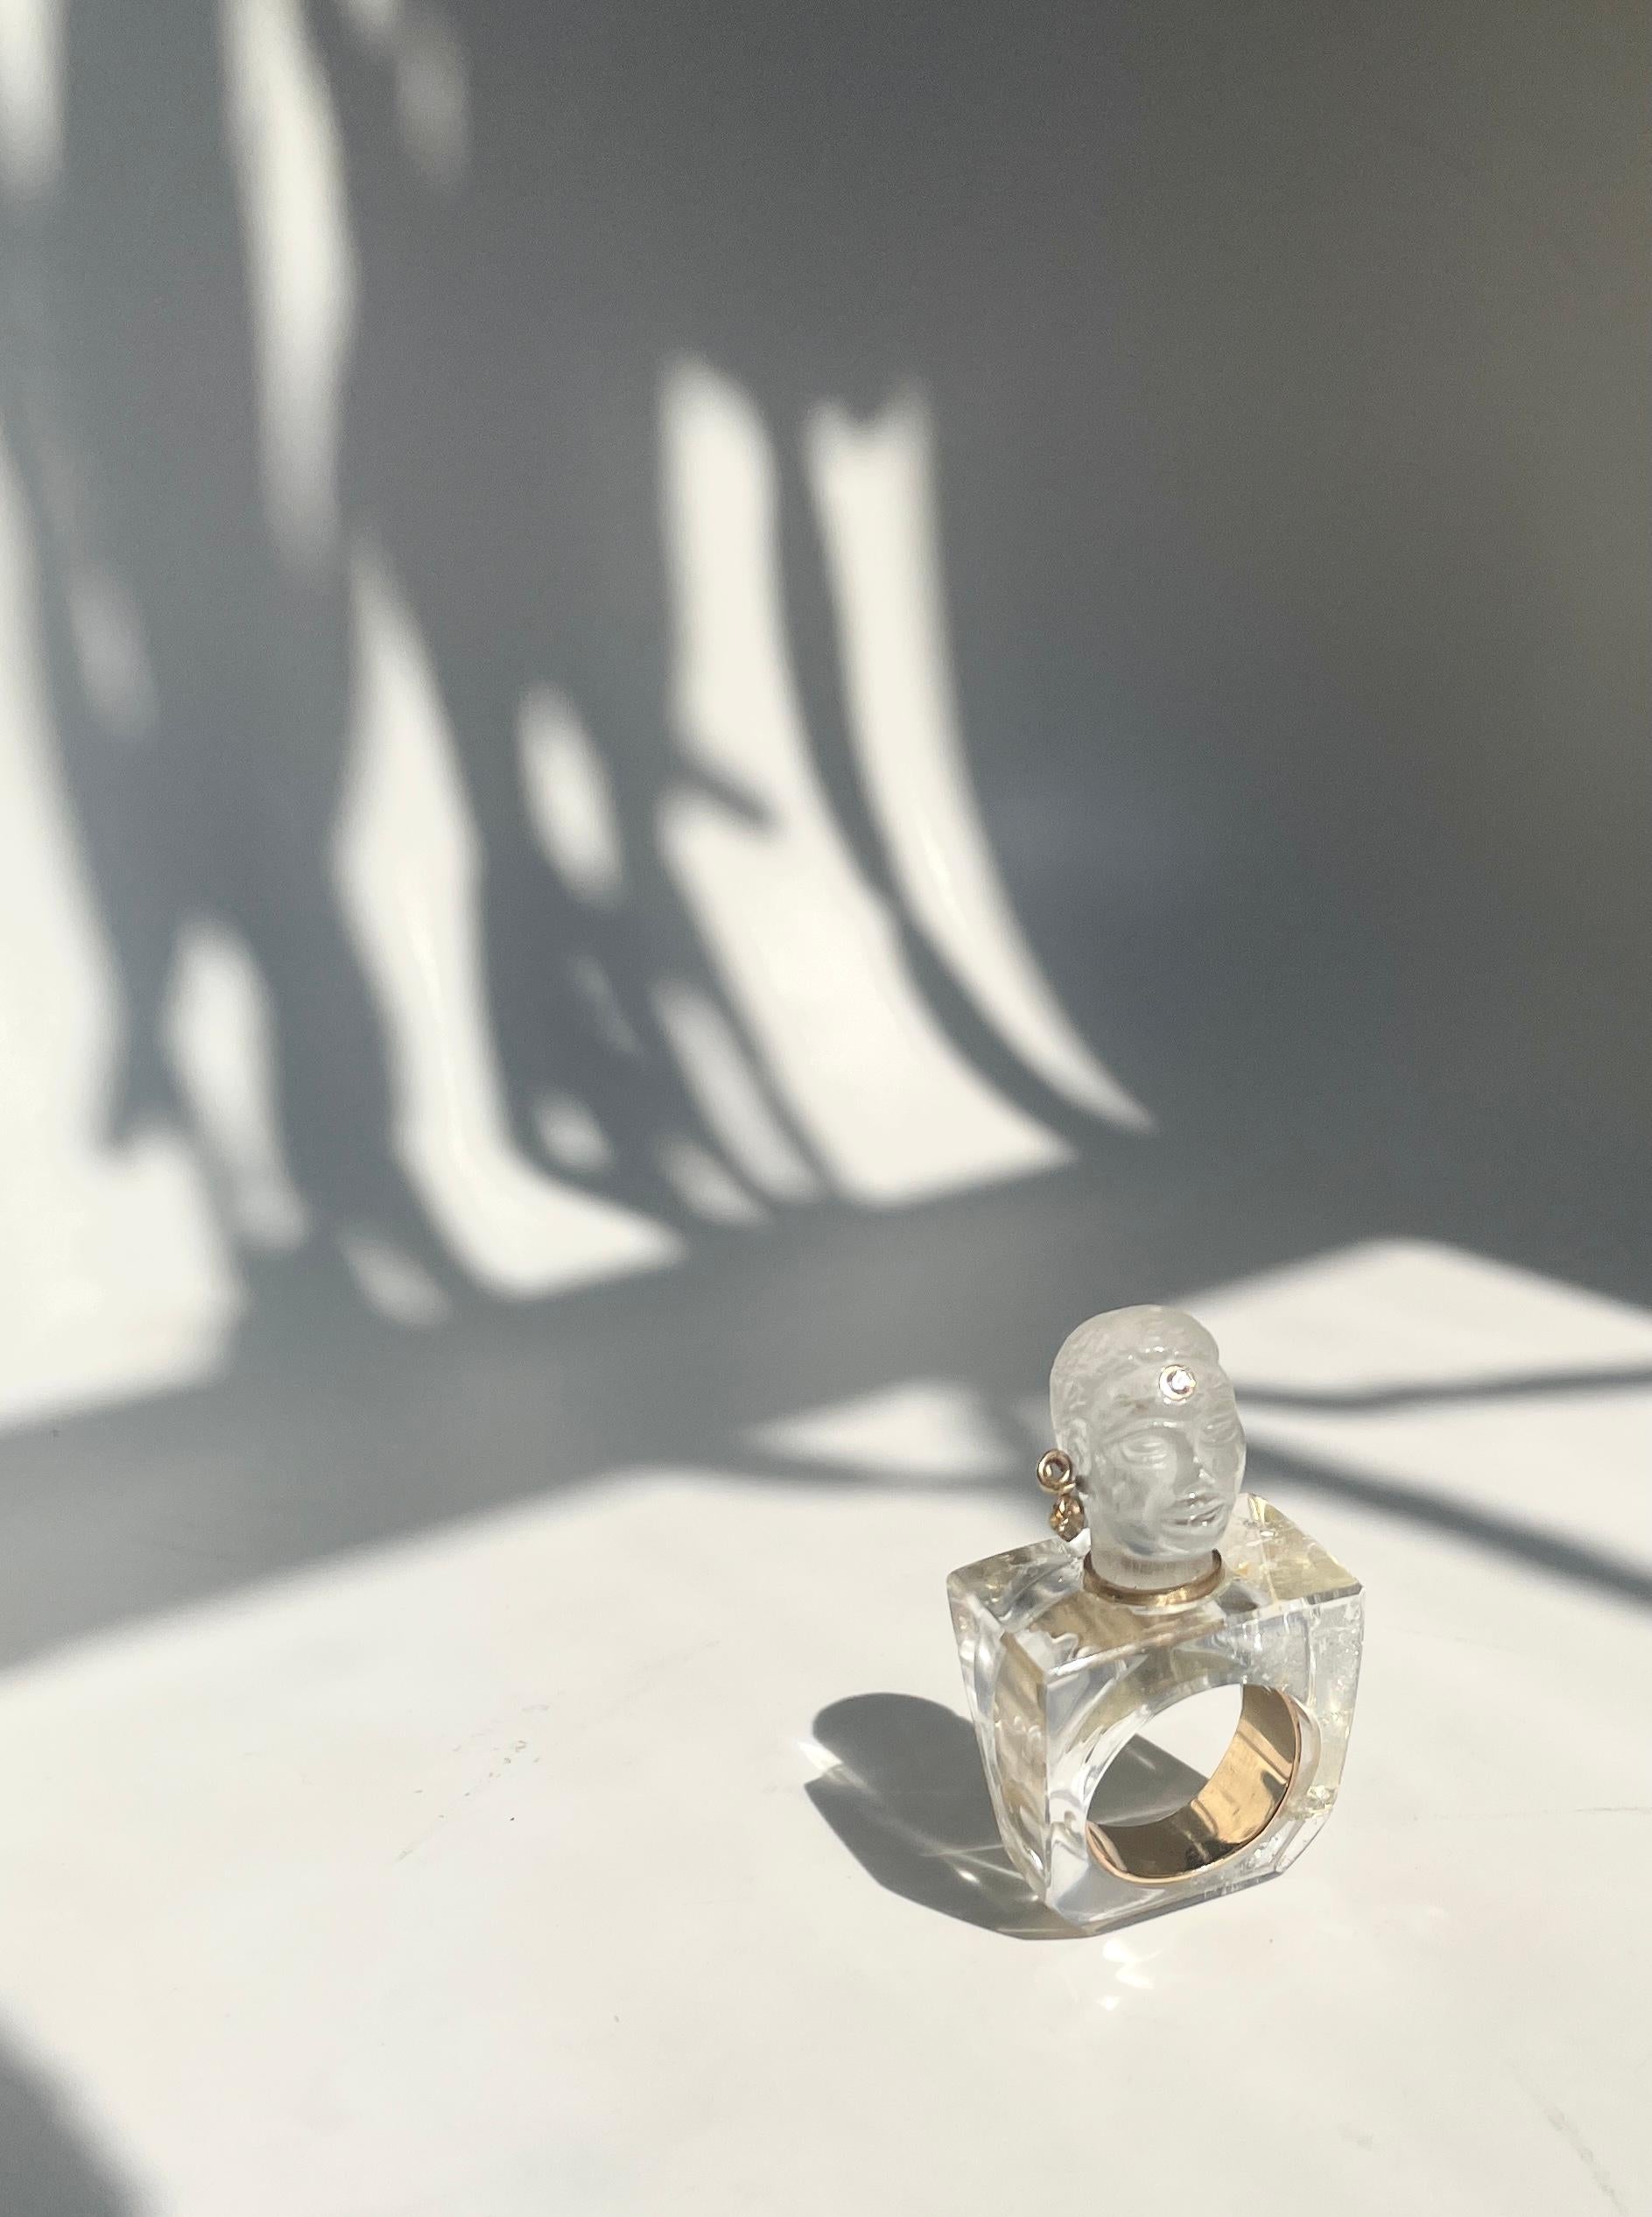 Brooklyamoor Olmec Statue Quartz Crystal, 14K Gold VVS Diamond Ring by L'ENCHANTEUR.

The Brooklyamoor Olmec head, is an artifact awaiting discovery. Mystic in every detail, each hand carved quartz head and ring is one of a kind. Life like facial